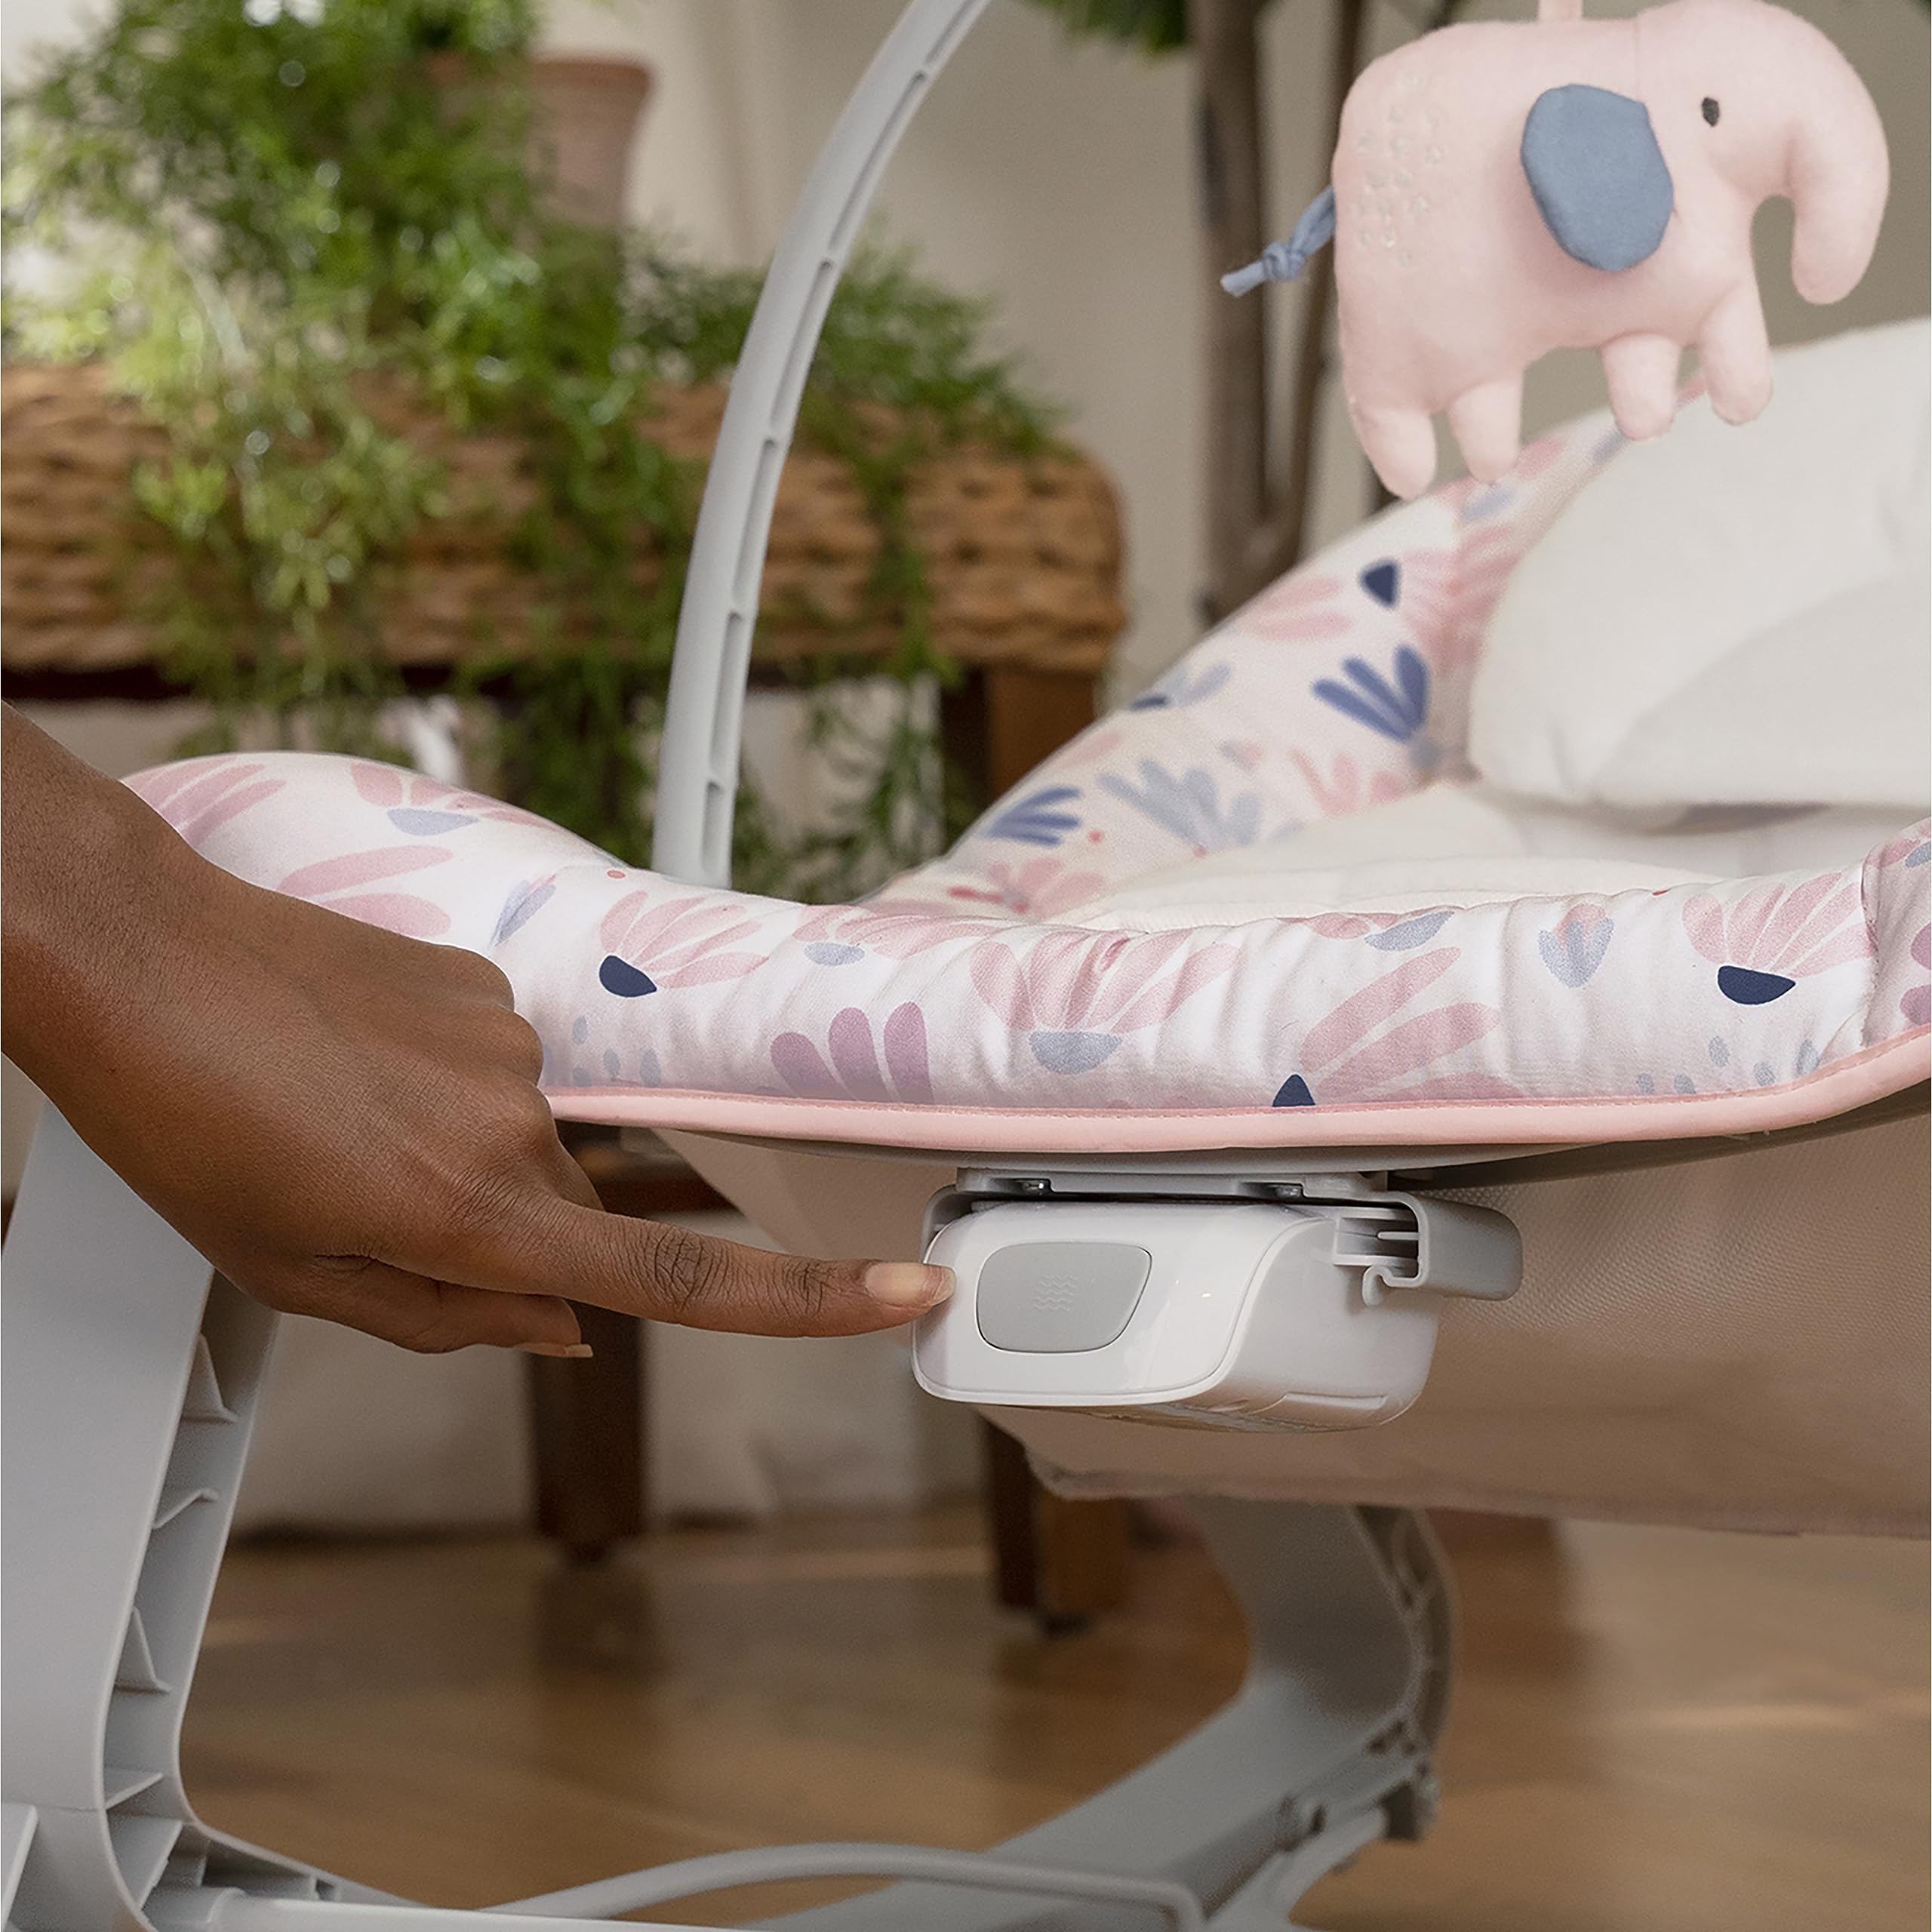 Ingenuity Keep Cozy 3-in-1 Grow with Me Vibrating Baby Bouncer Seat & Infant to Toddler Rocker, Vibrations & -Toy Bar, 0-30 Months Up to 40 lbs (Pink Burst)